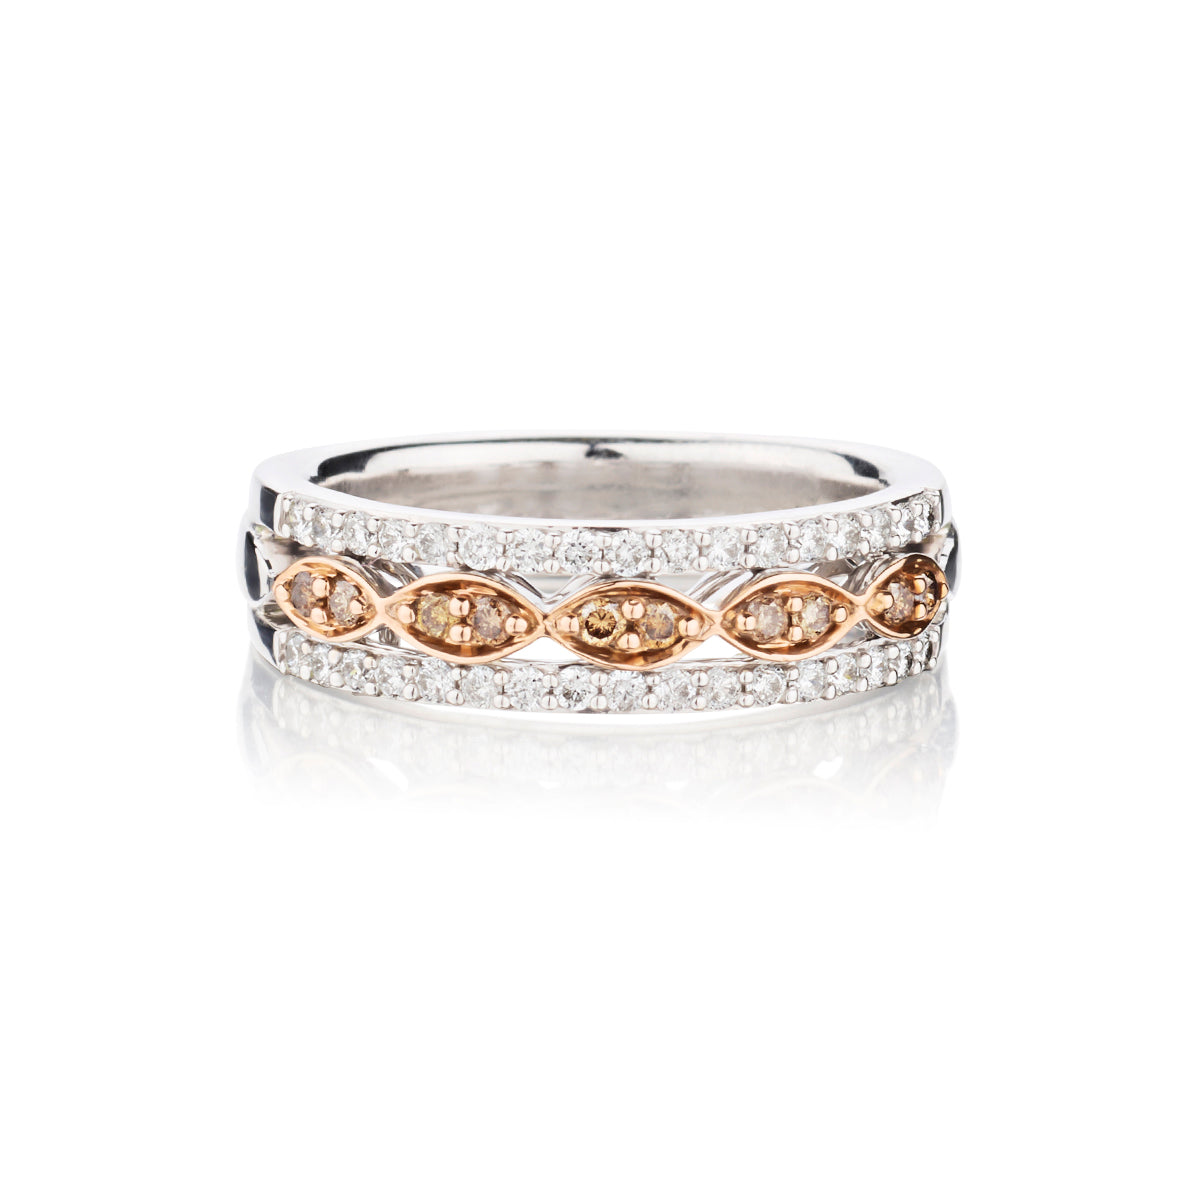 Ladies 14kt White and Rose Gold Diamond Band. 0.51ct Tw